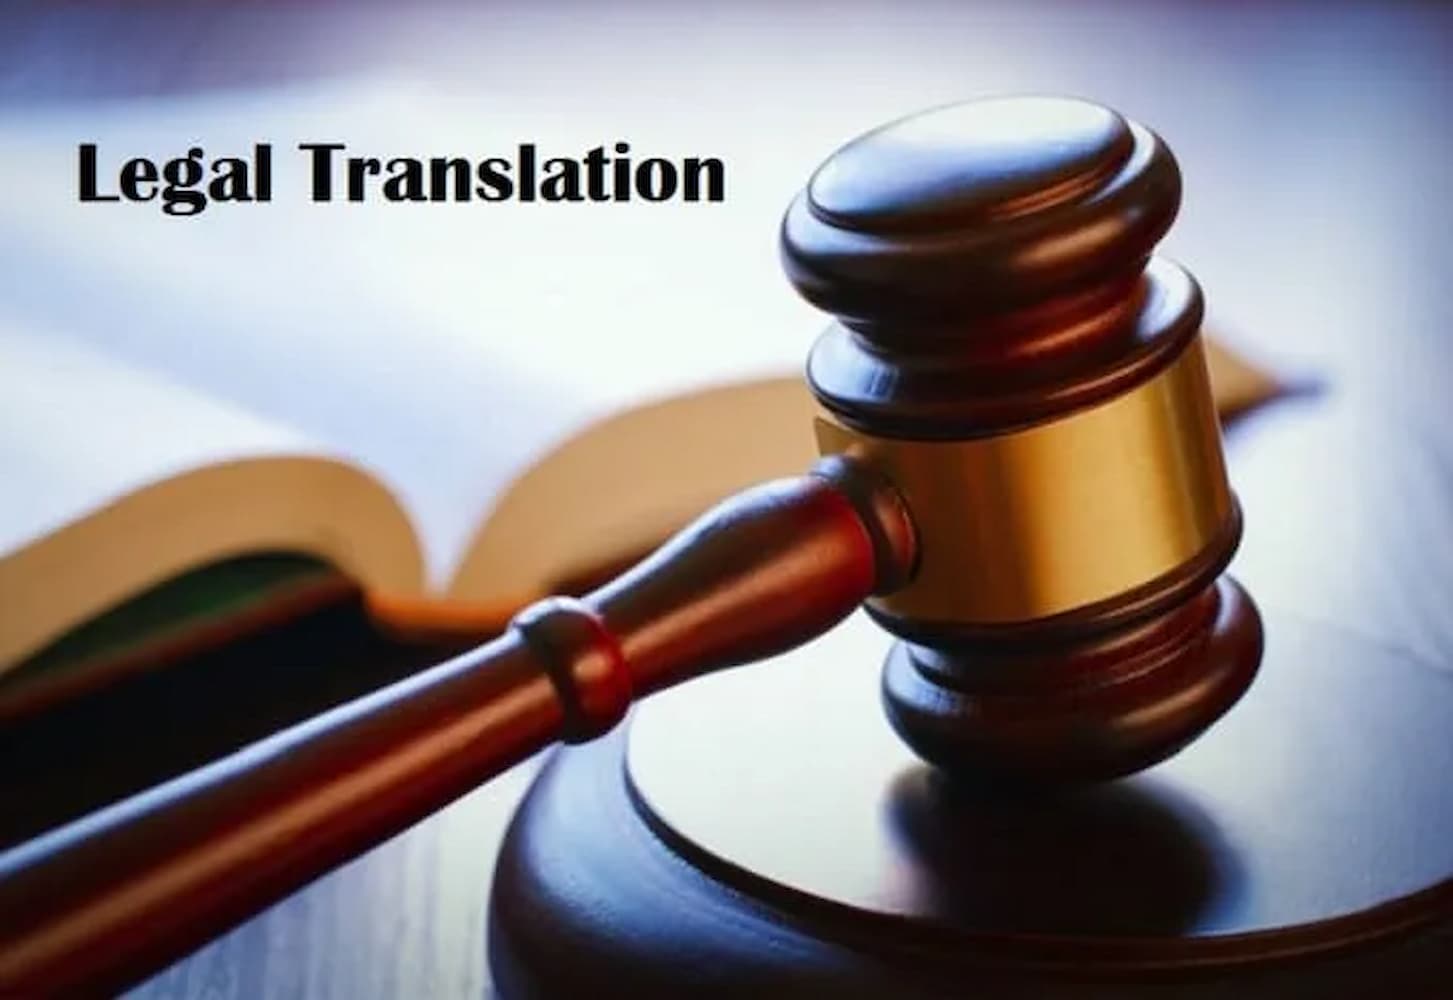 Your Trusted Partner for Legal Translation in Dubai